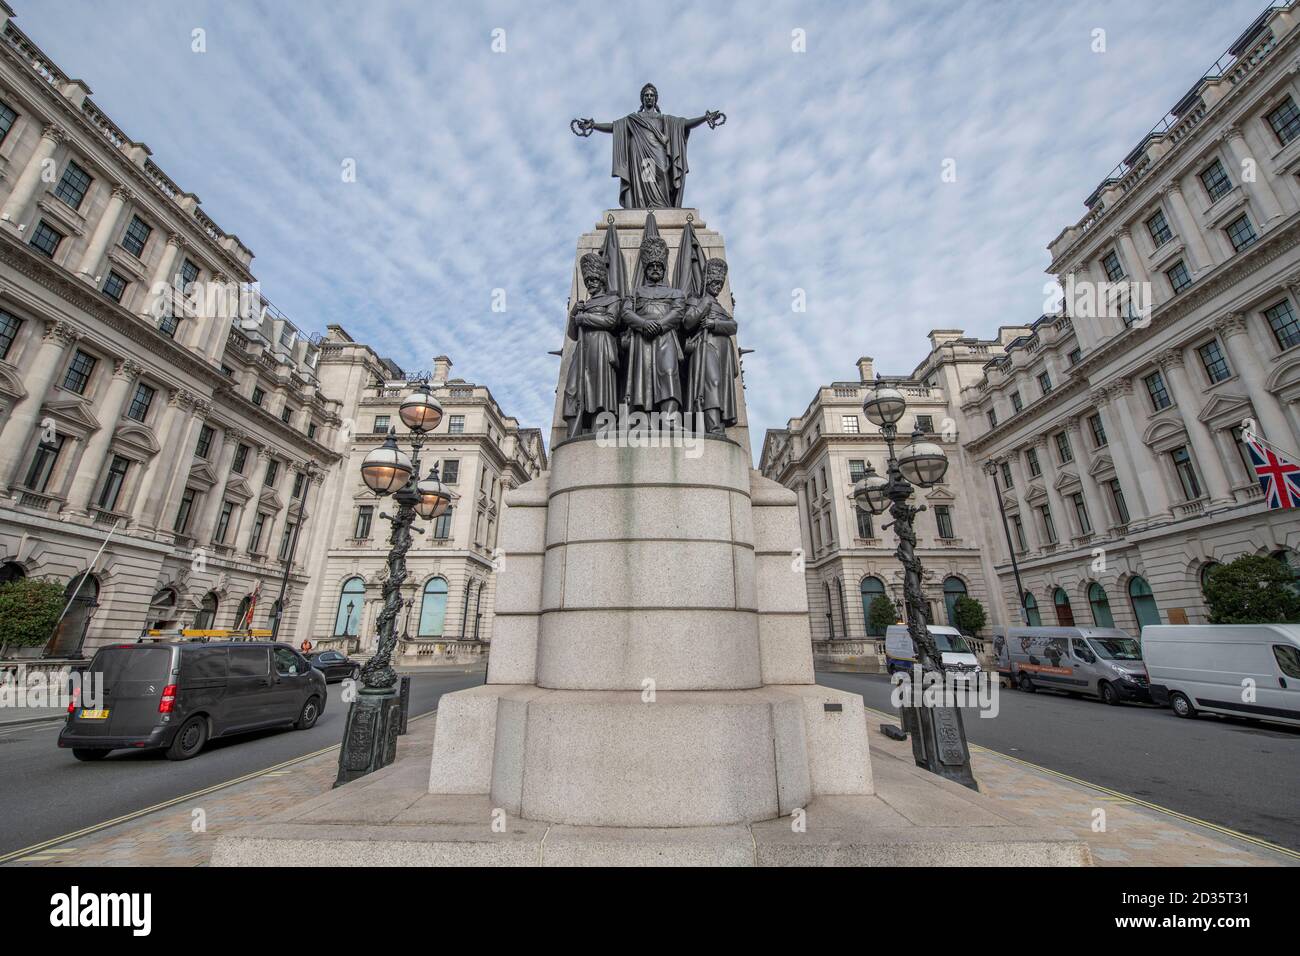 Westminster, London, UK. 7 October 2020. A Mackerel sky over the Crimea War memorial, a harbinger of wet weather later in the day. Credit: Malcolm Park/Alamy Live News. Stock Photo